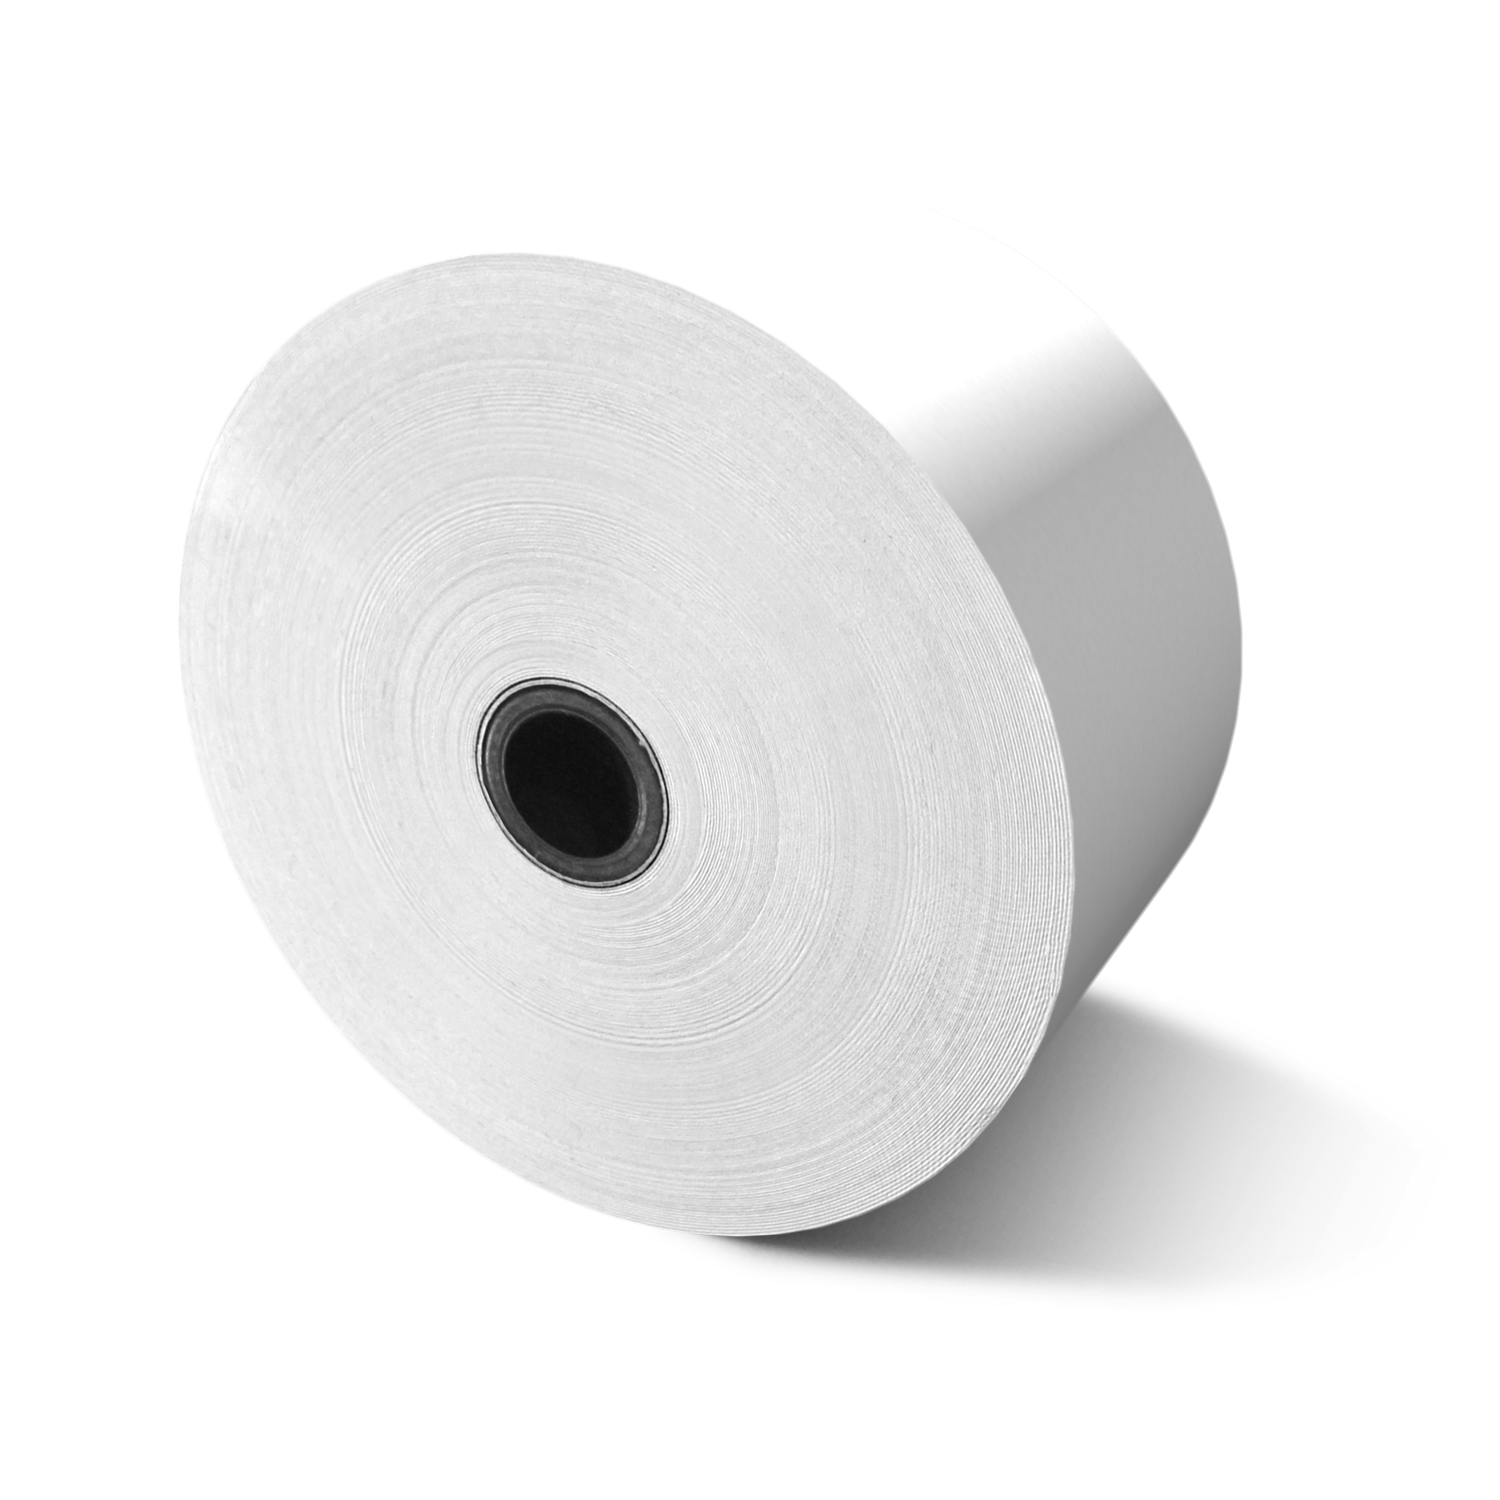 alliance-imaging-products-atm-paper-rolls